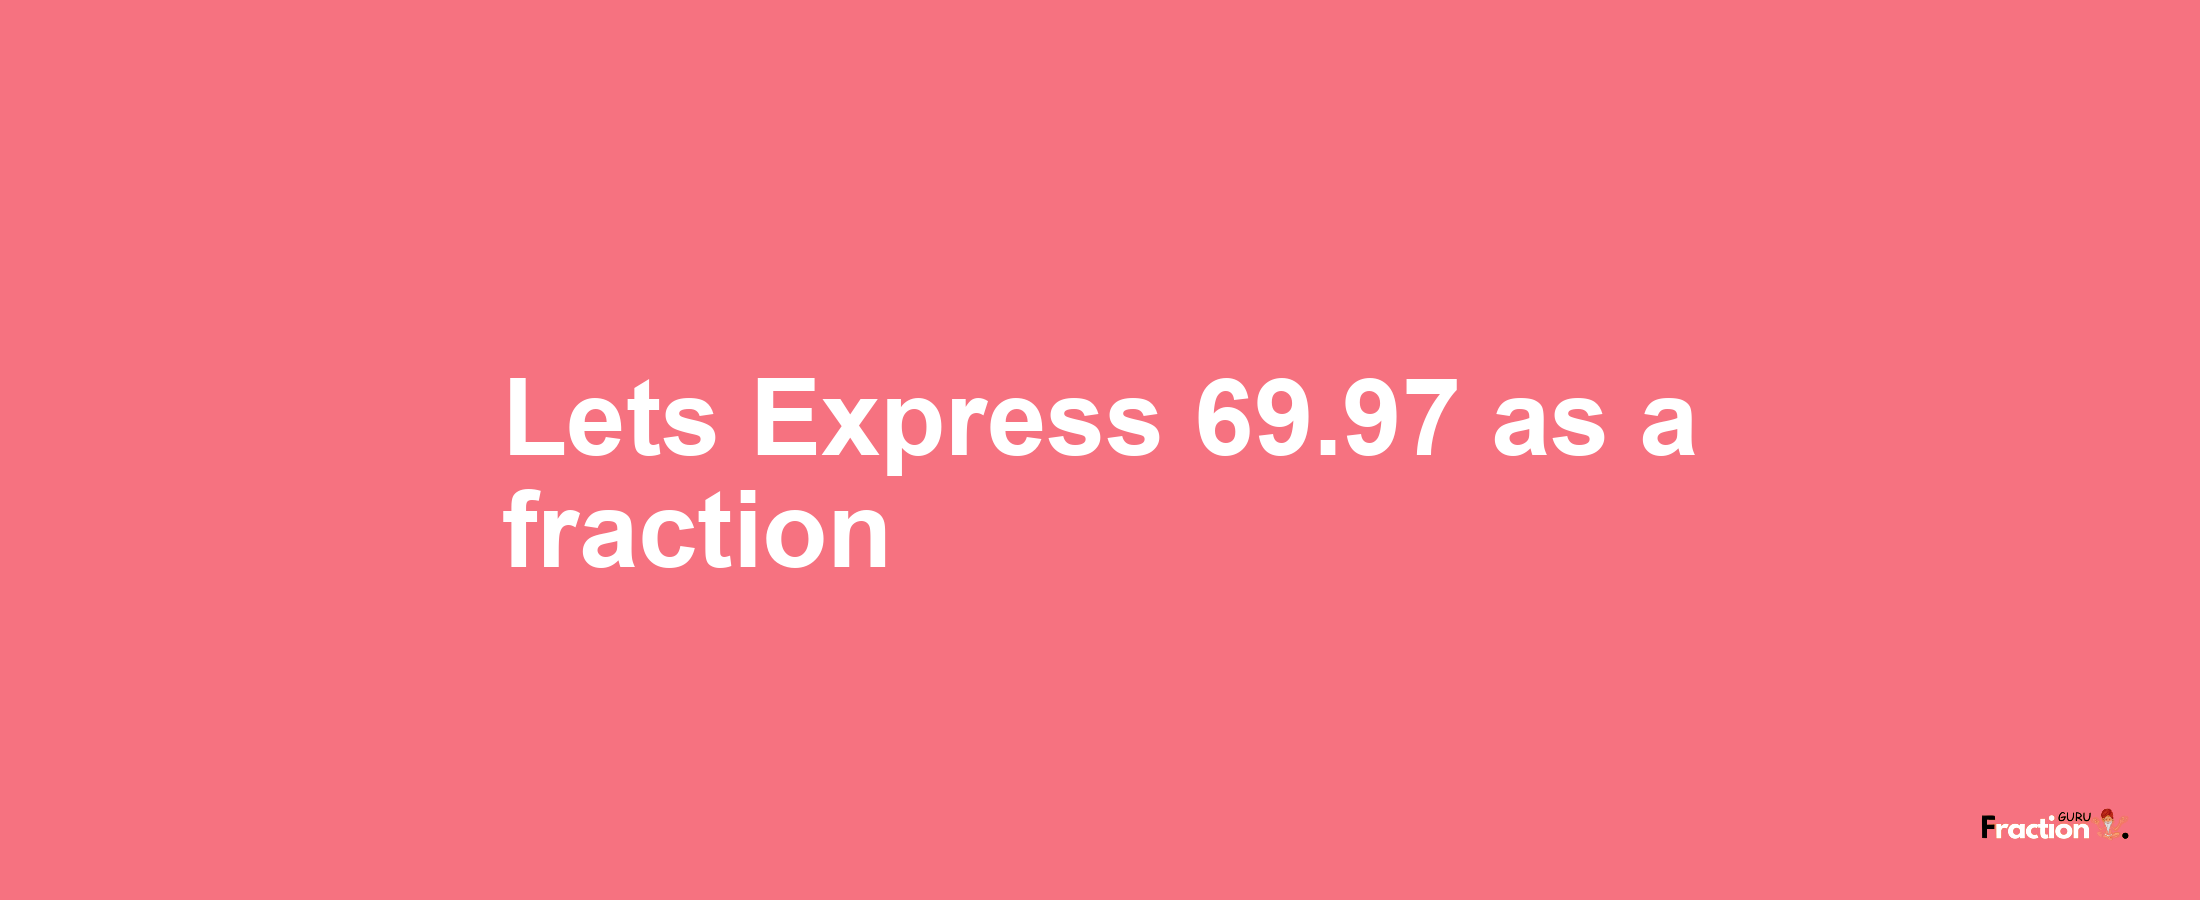 Lets Express 69.97 as afraction